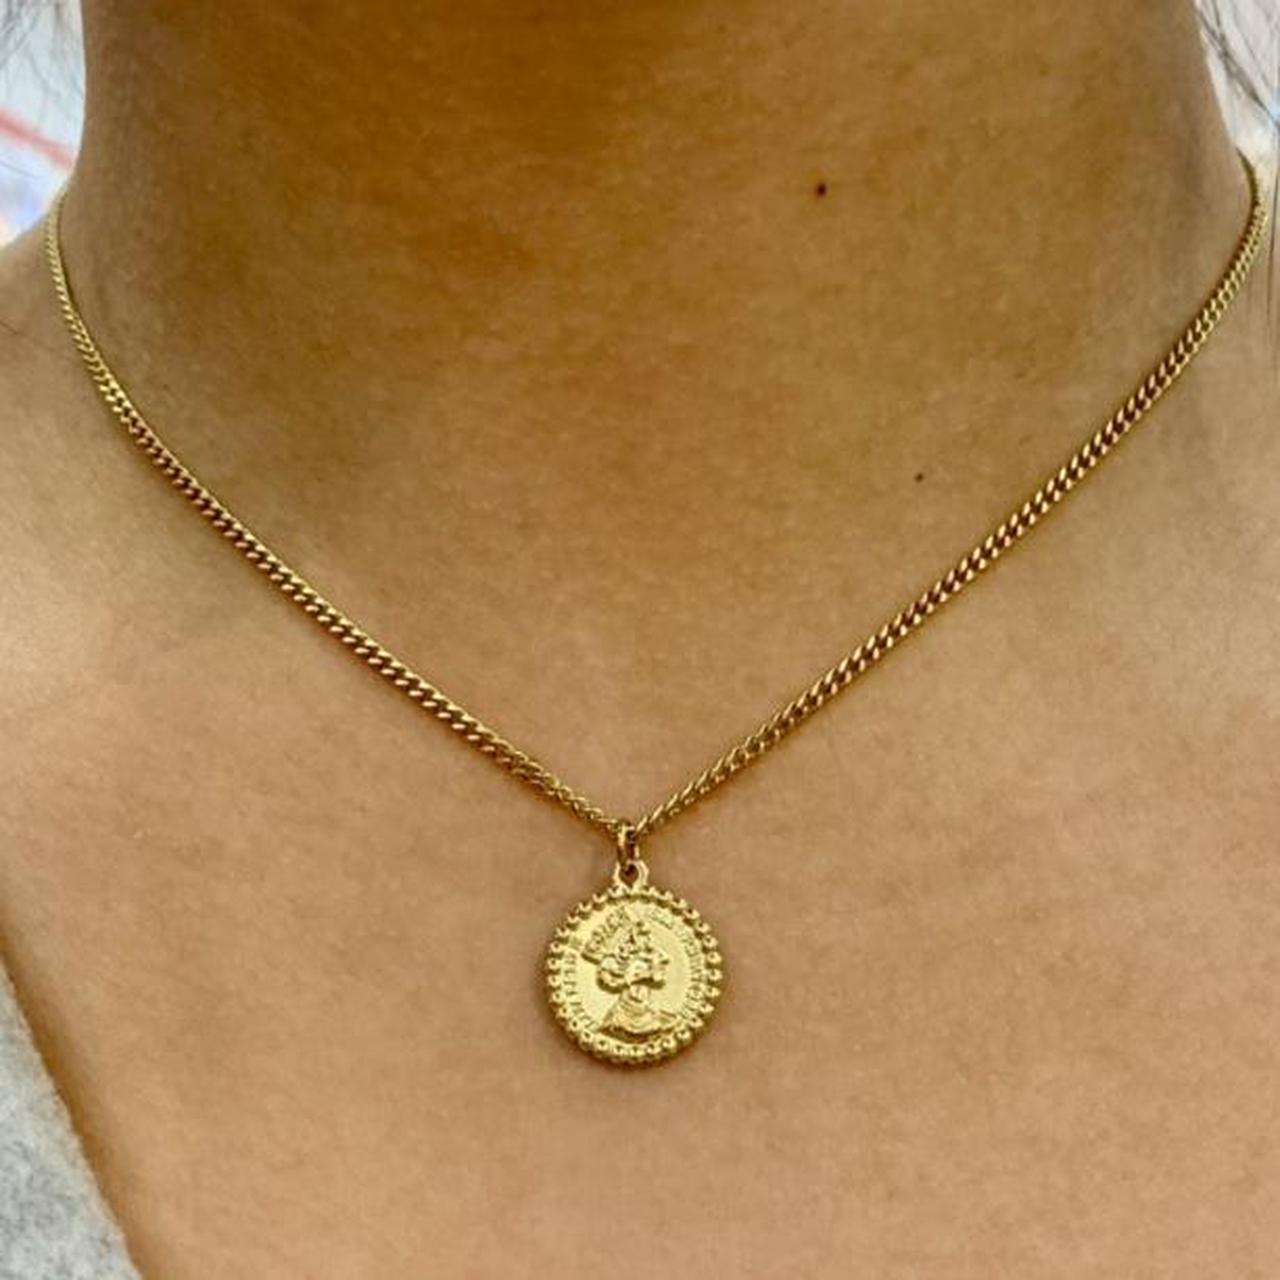 Product Image 1 - Gold Queen Coin Pendant Necklace